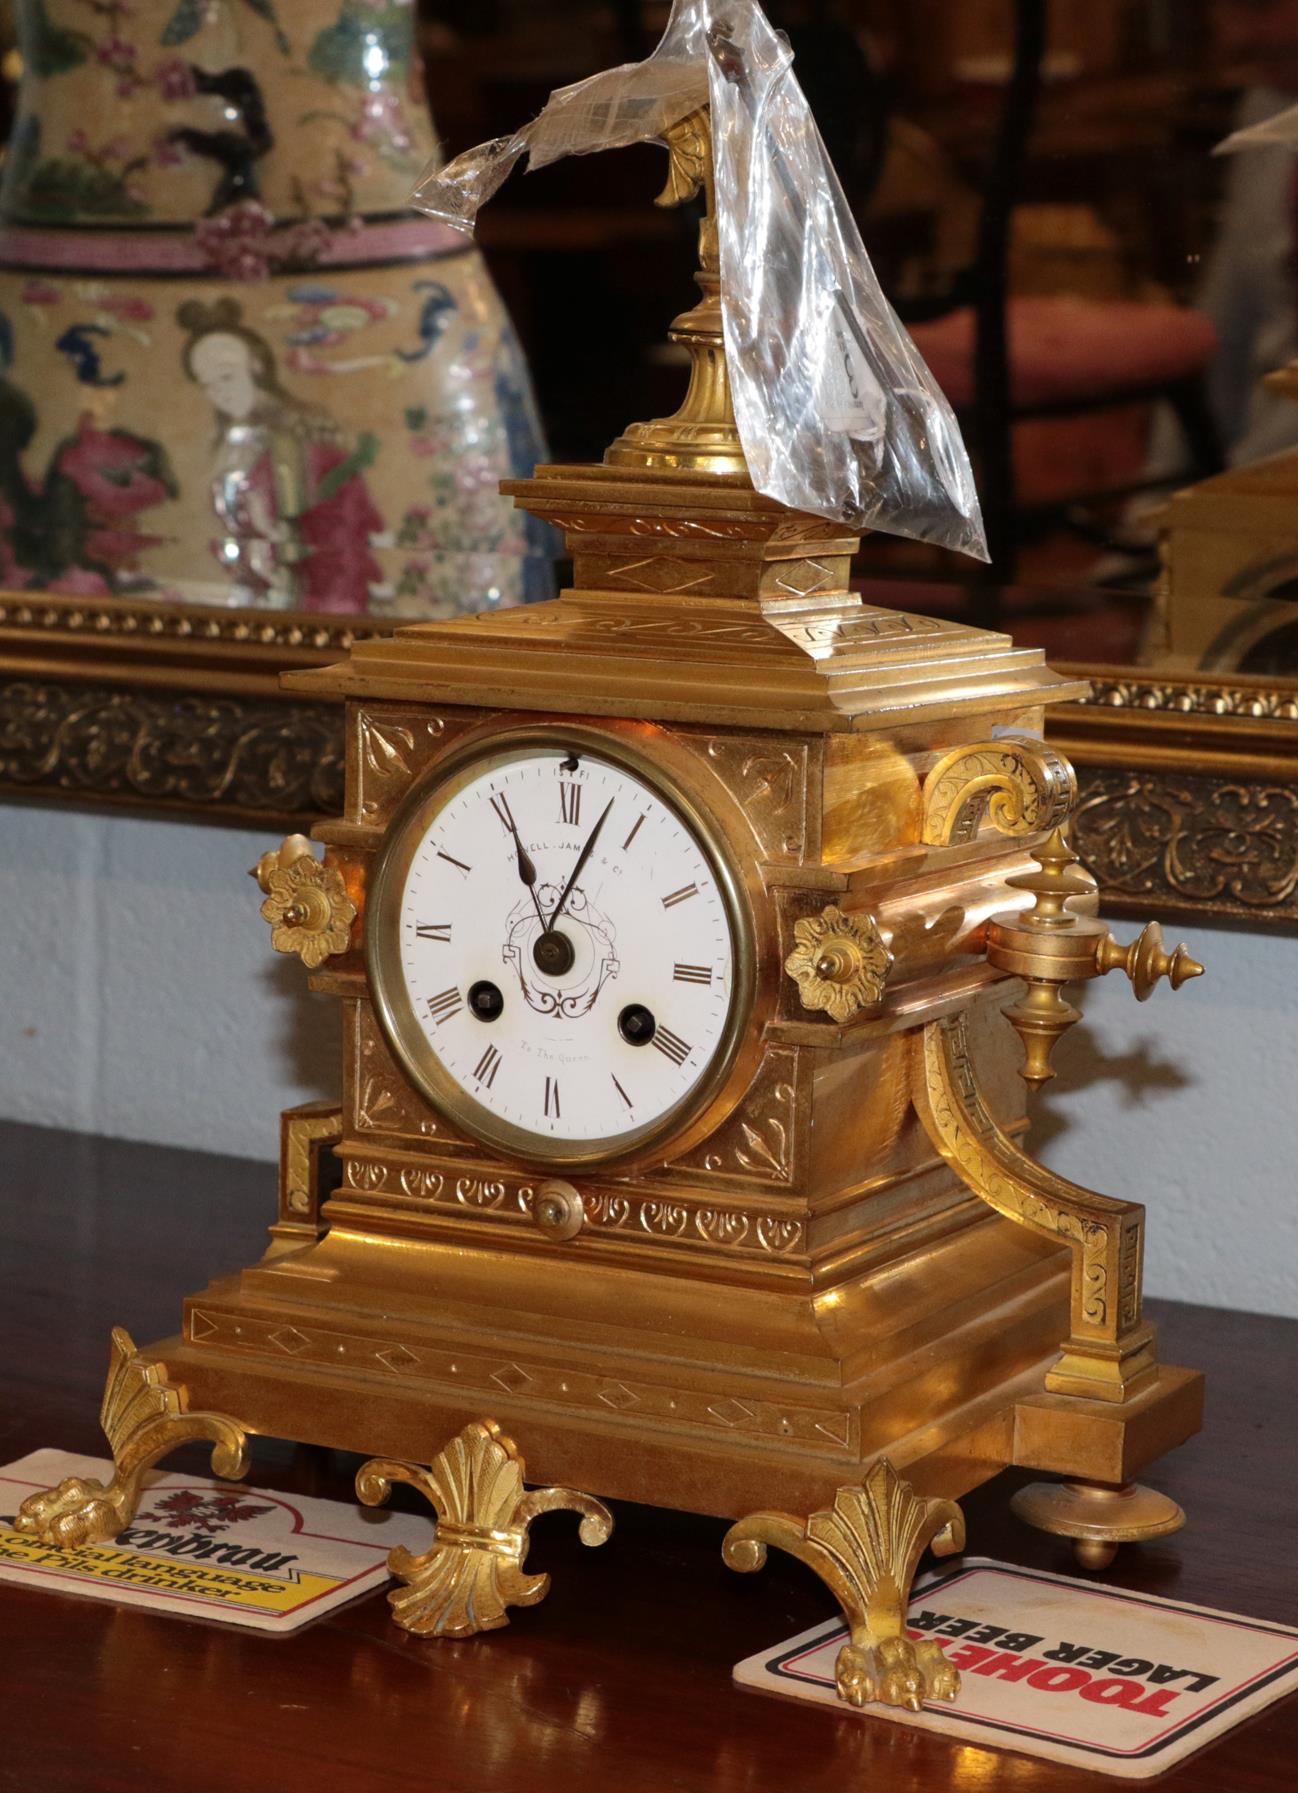 A 19th century ormolu mantel clock, Howell, James & Co., with winder